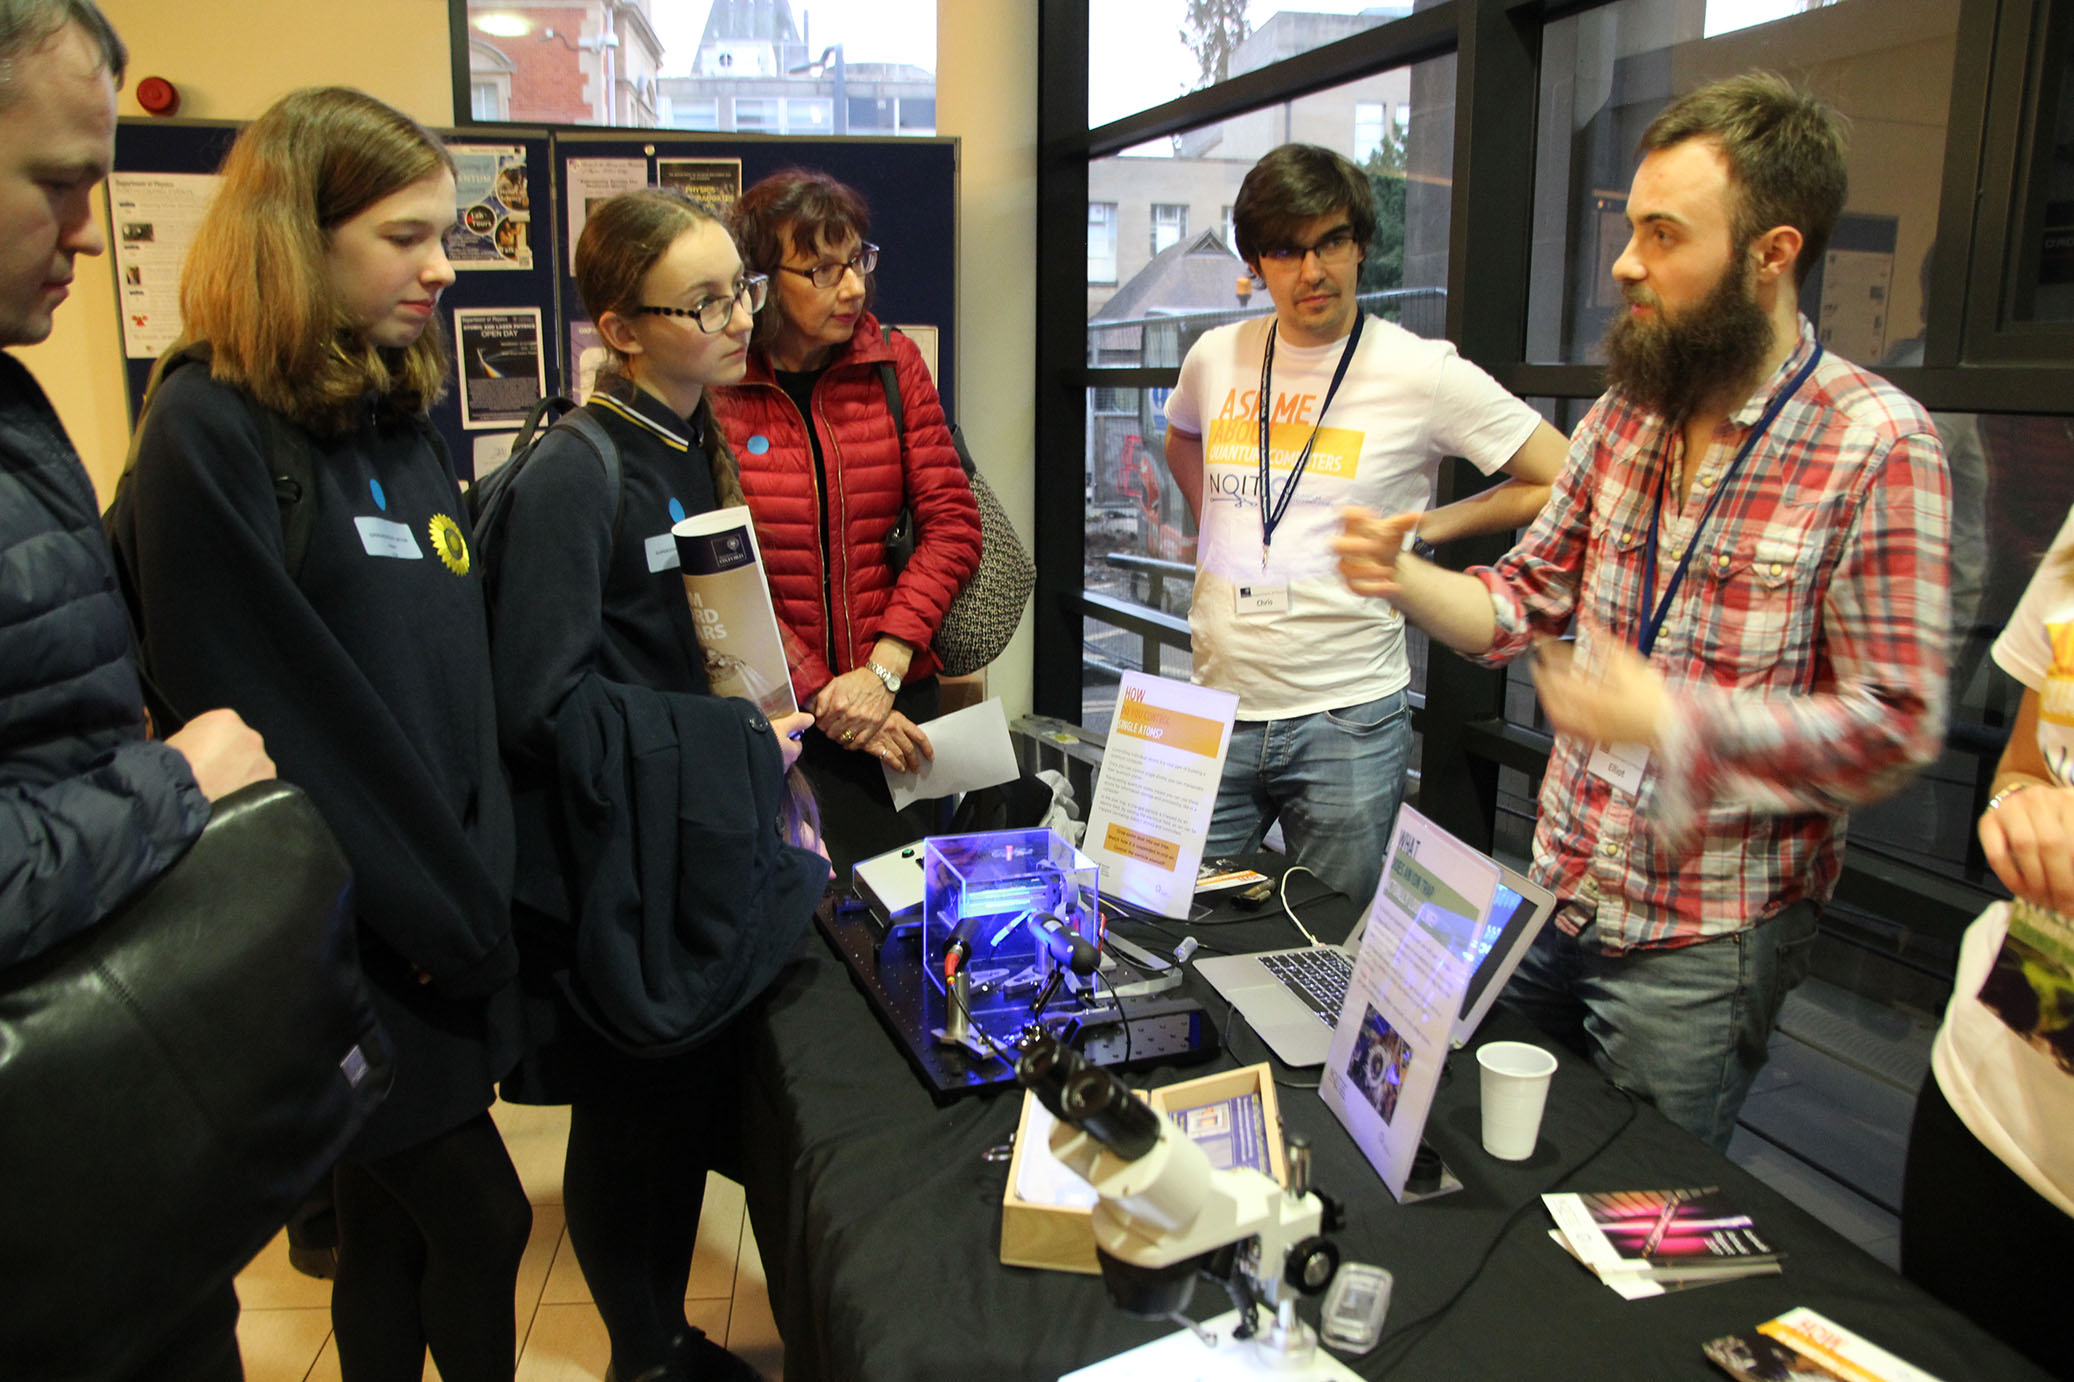 Science Fair at the Evening of Quantum Discovery / Credit: Olga Brecht, NQIT